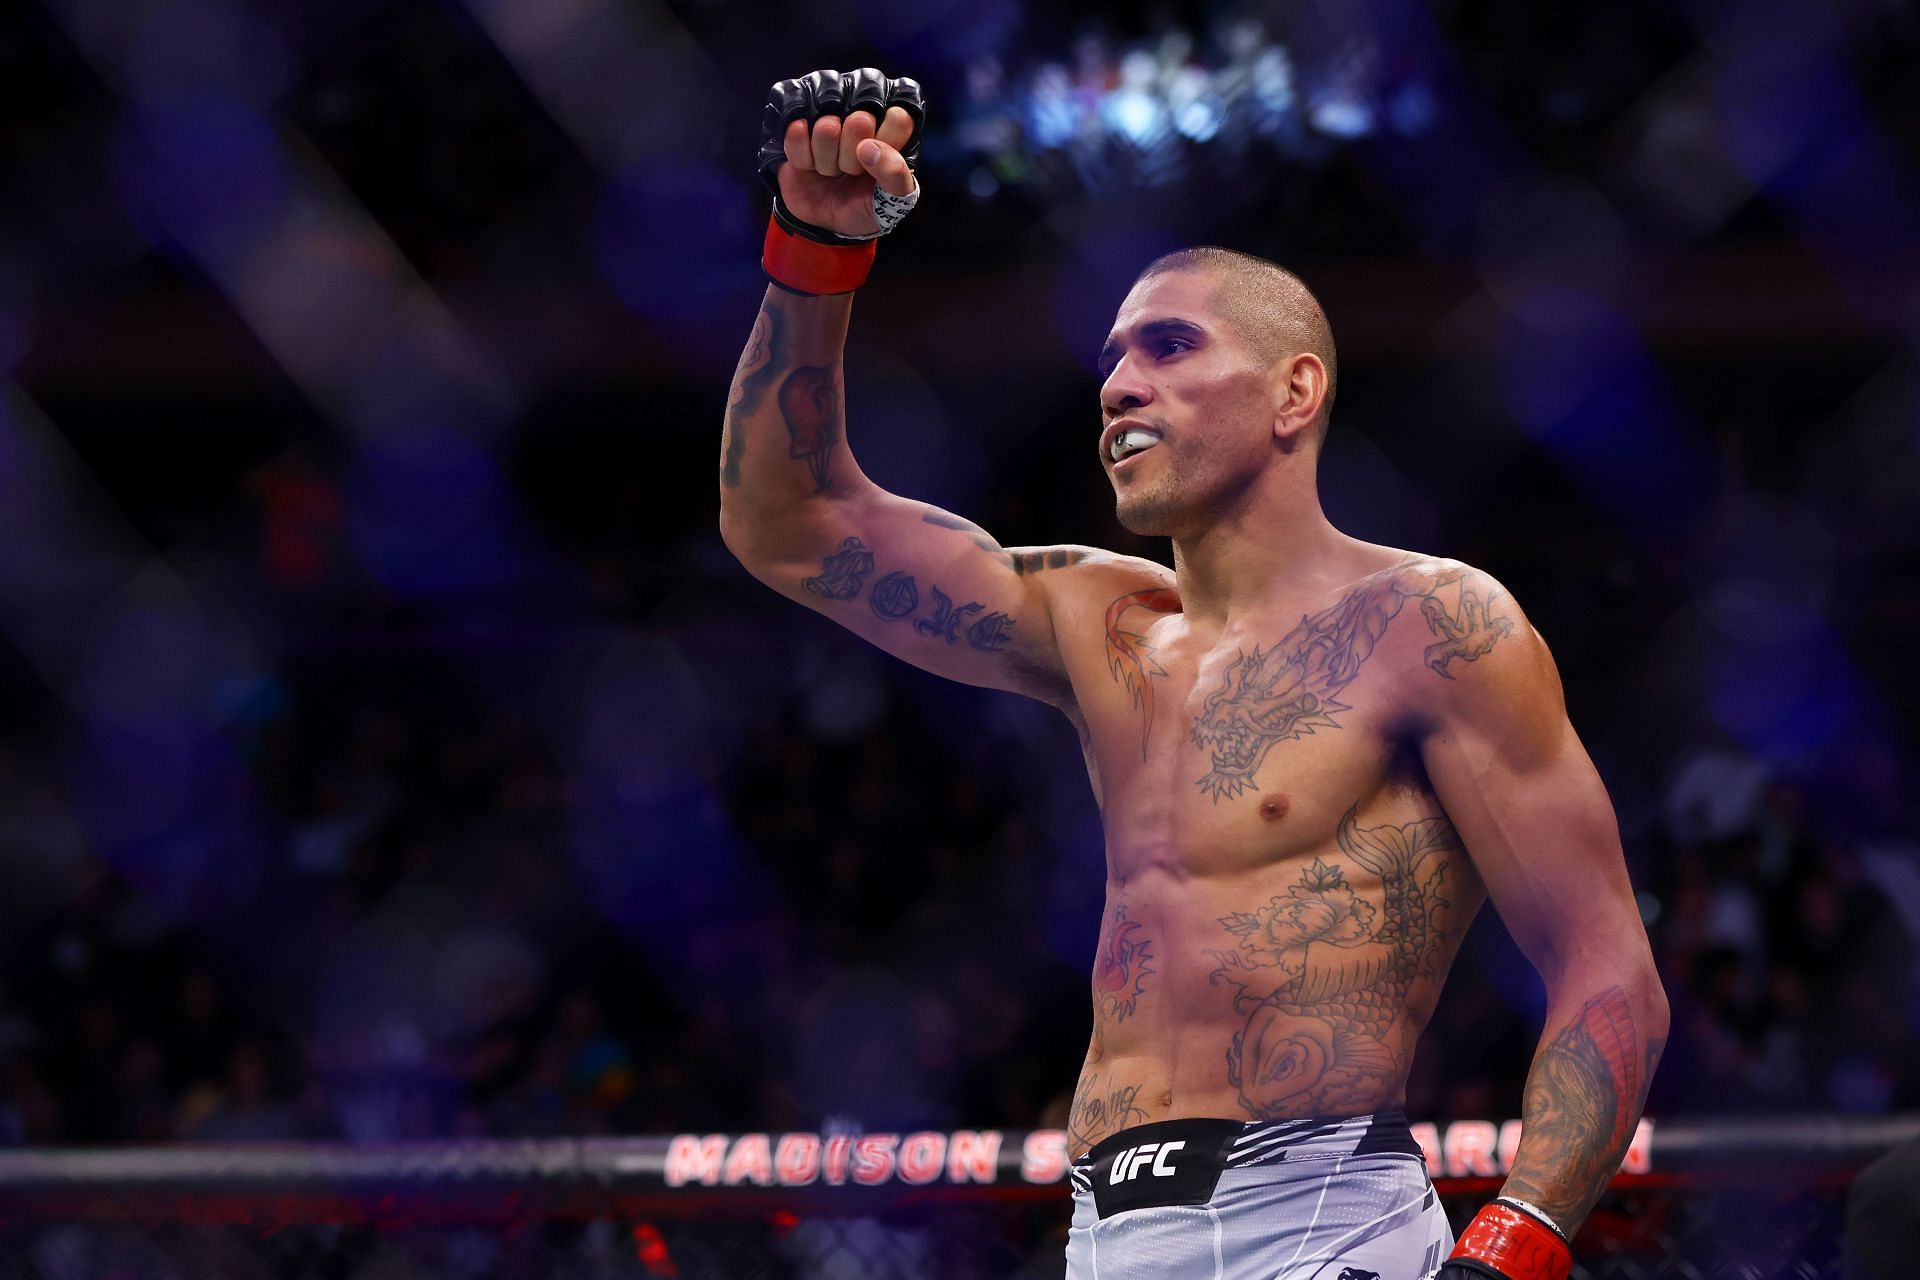 Pereira debuted with a TKO win at UFC 268